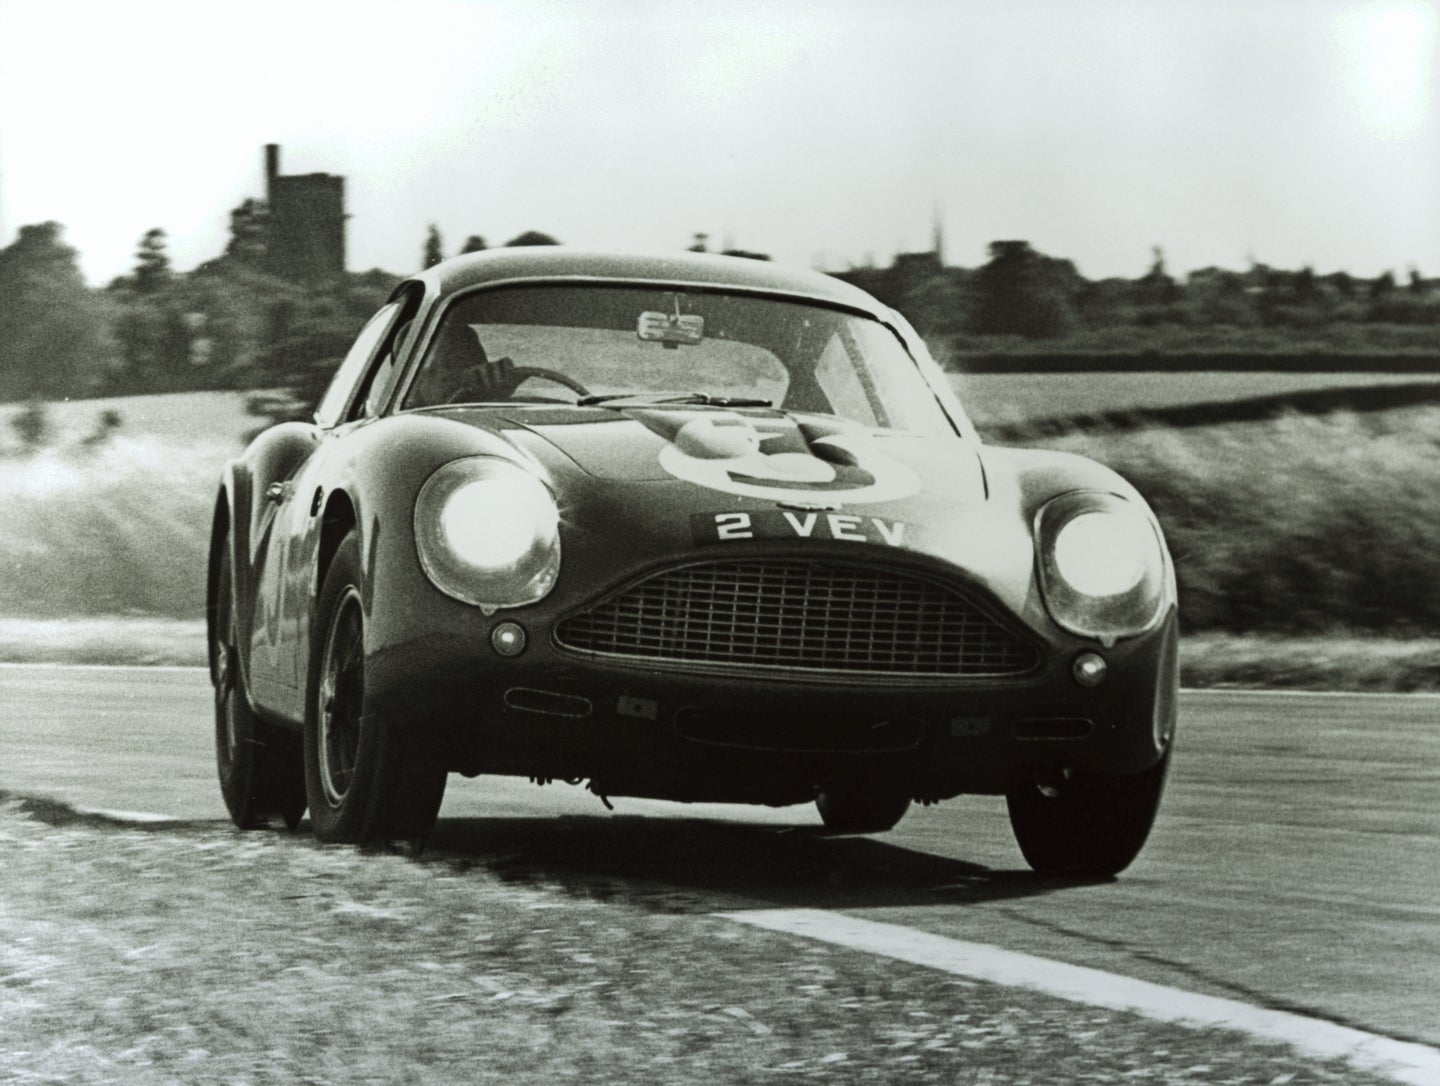 Aston Martin DB4 Turns 60, Will Be Exhibited at British Concours of Elegance